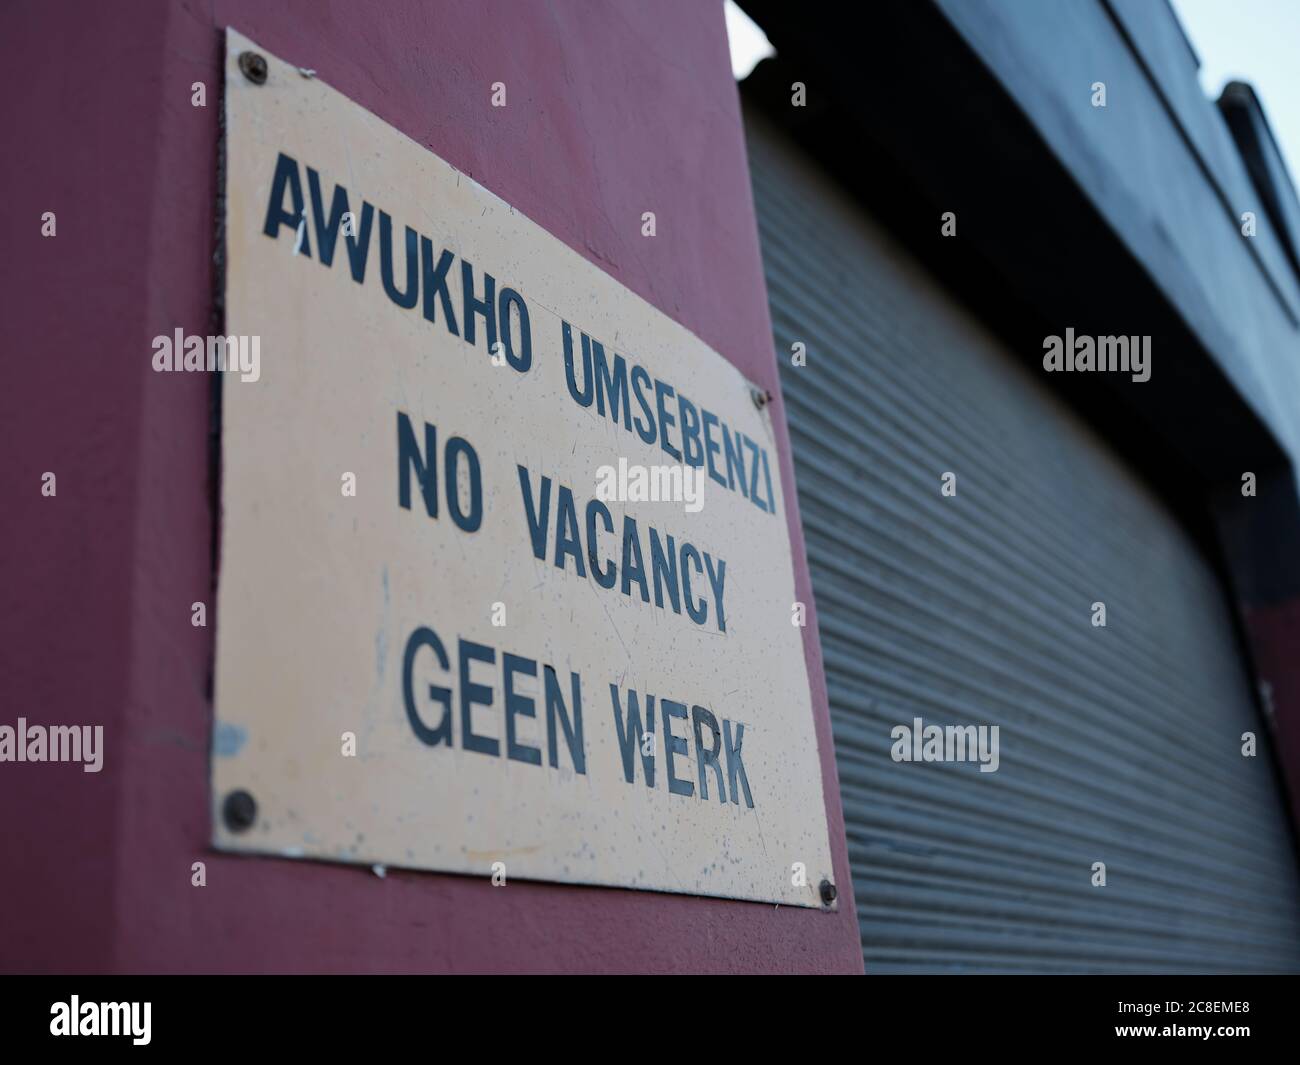 No vacancy sign mounted on an outside wall of an industrial building in Cape Town, South Africa. The sign is in Zulu, English and Afrikaans. Stock Photo